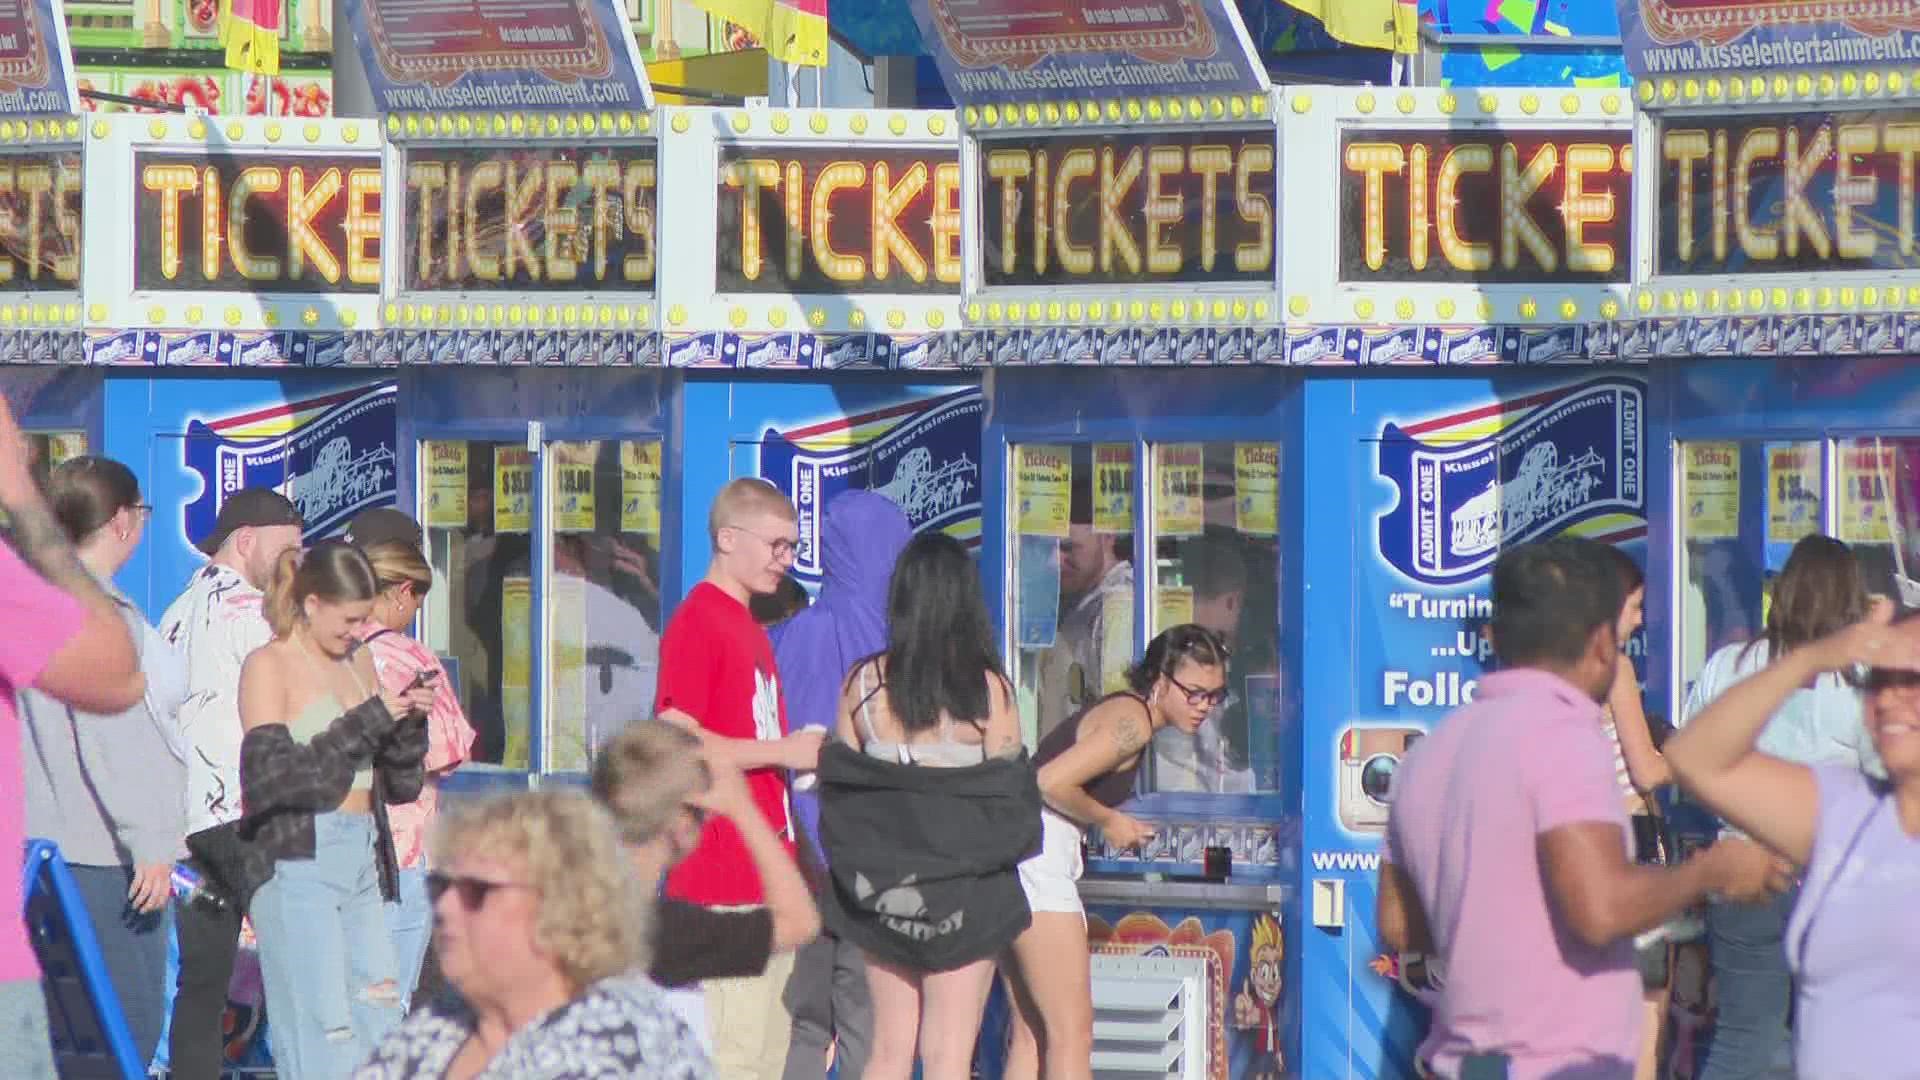 Despite witnesses describing what sounded like gunshots, Kentucky State Police said there was no evidence of a shooting Saturday night at the fair.